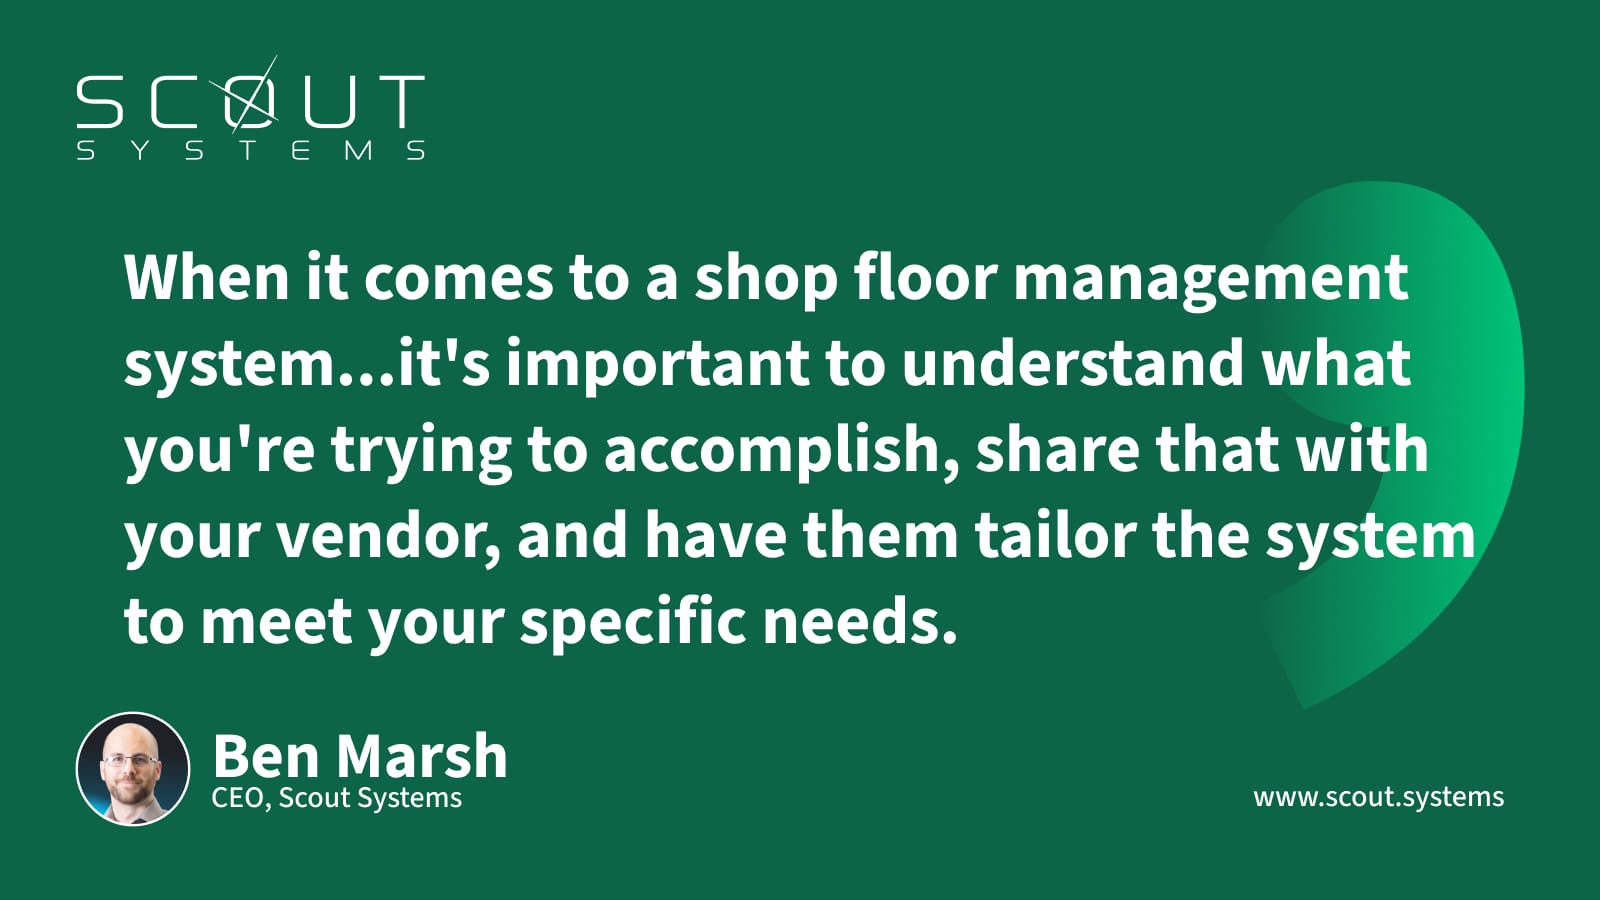 The Top Features to Look for in a Shopfloor Management System